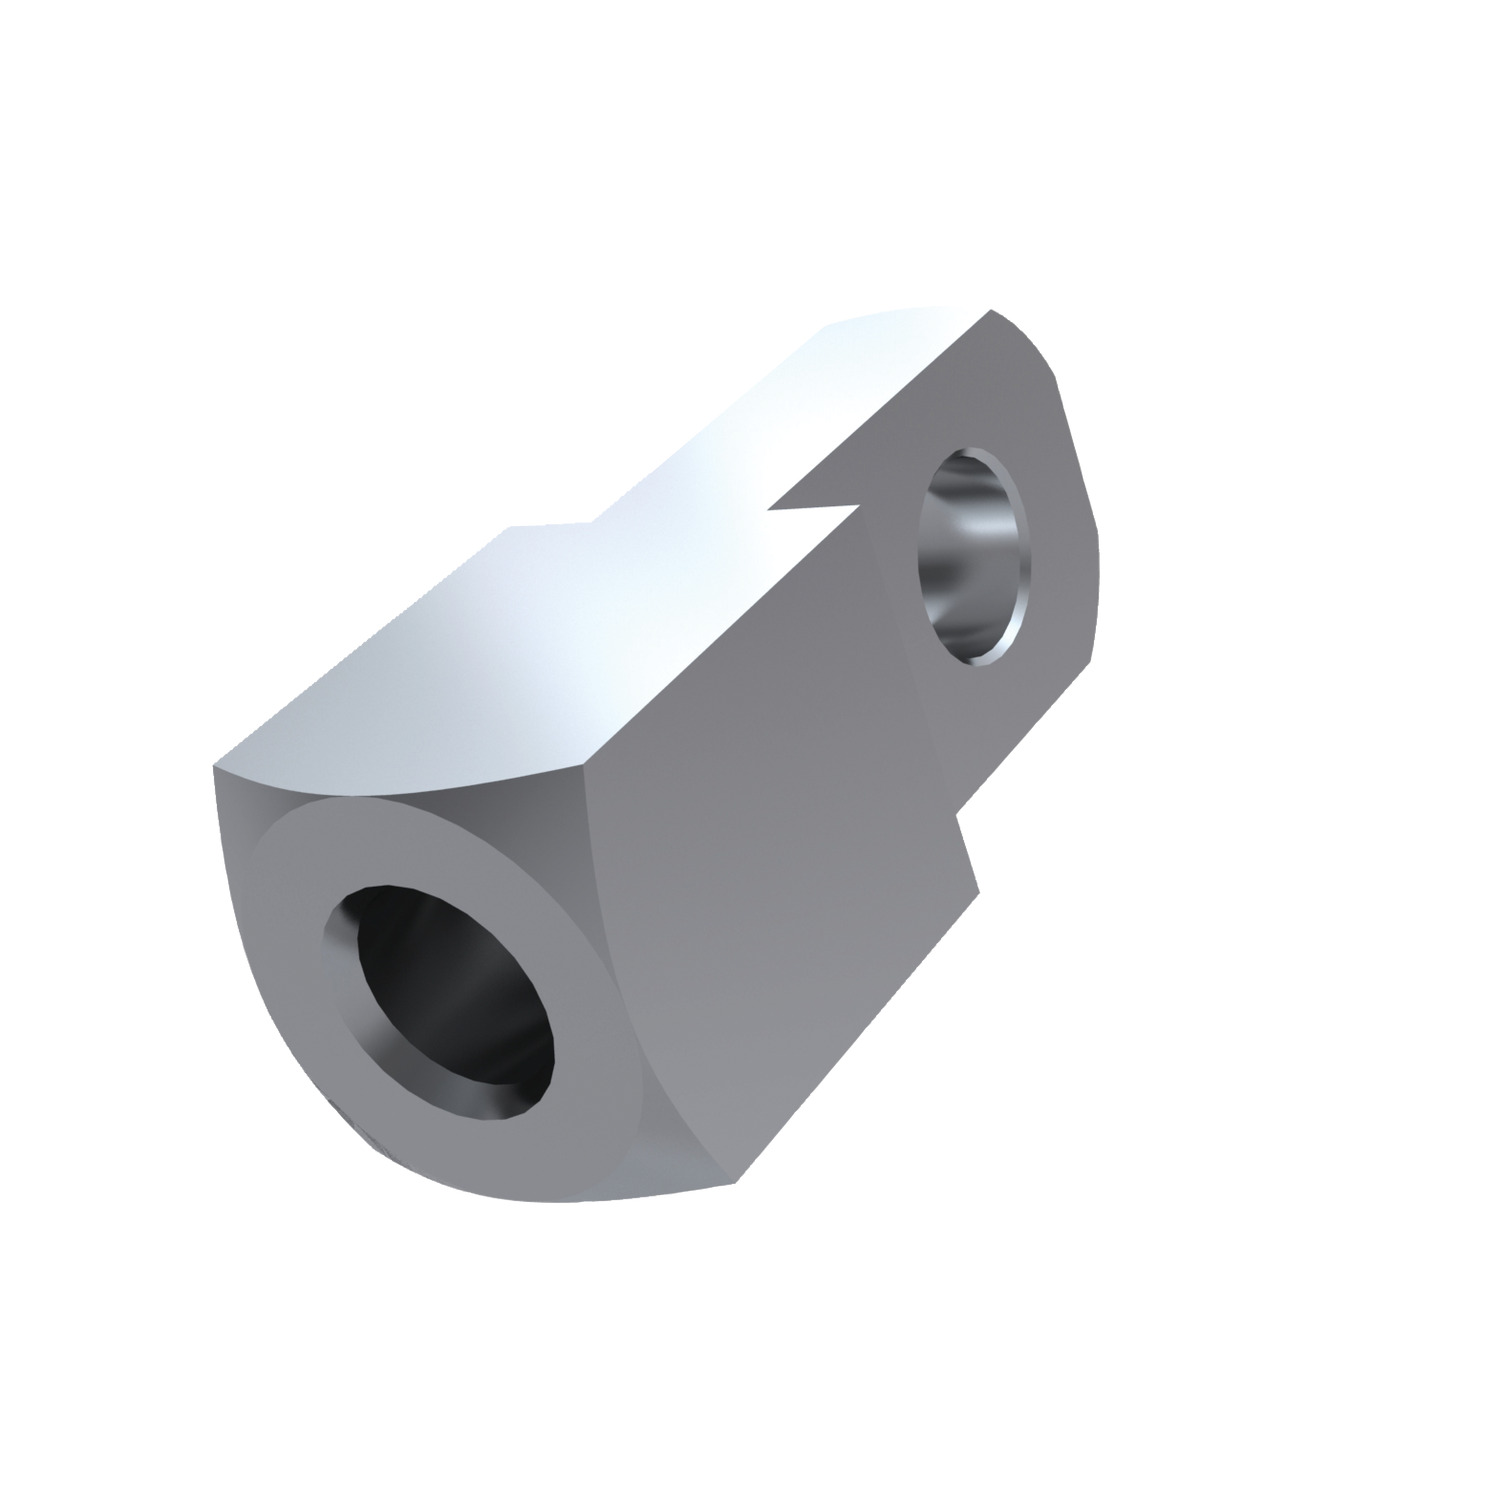 65653 - Mating Piece for Clevis Joints